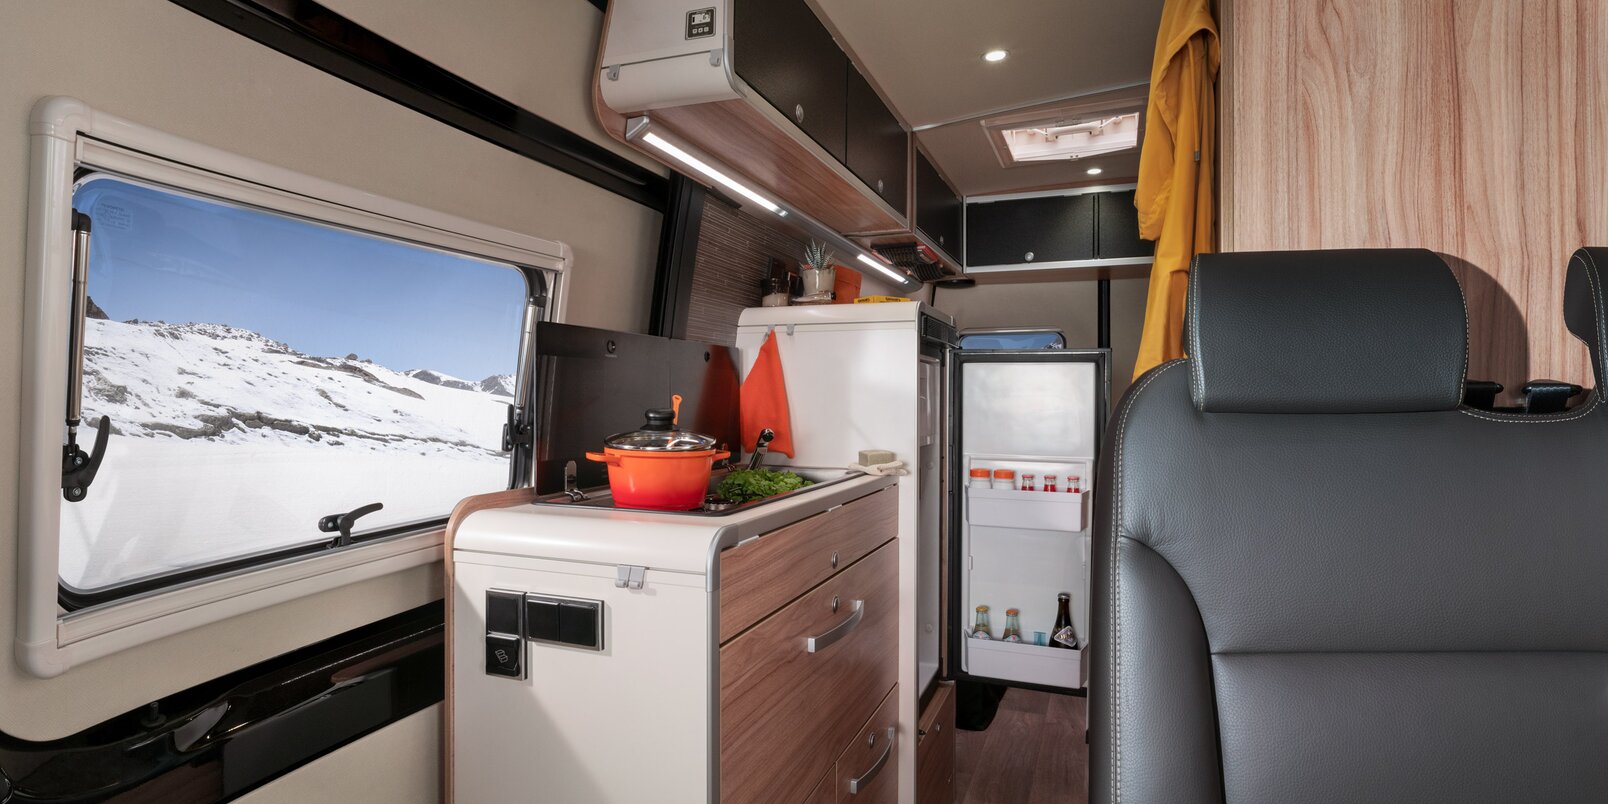 Bench, kitchen block with open refrigerator, overhead storage cupboards, window with mountain view in the HYMER Grand Canyon S CrossOver